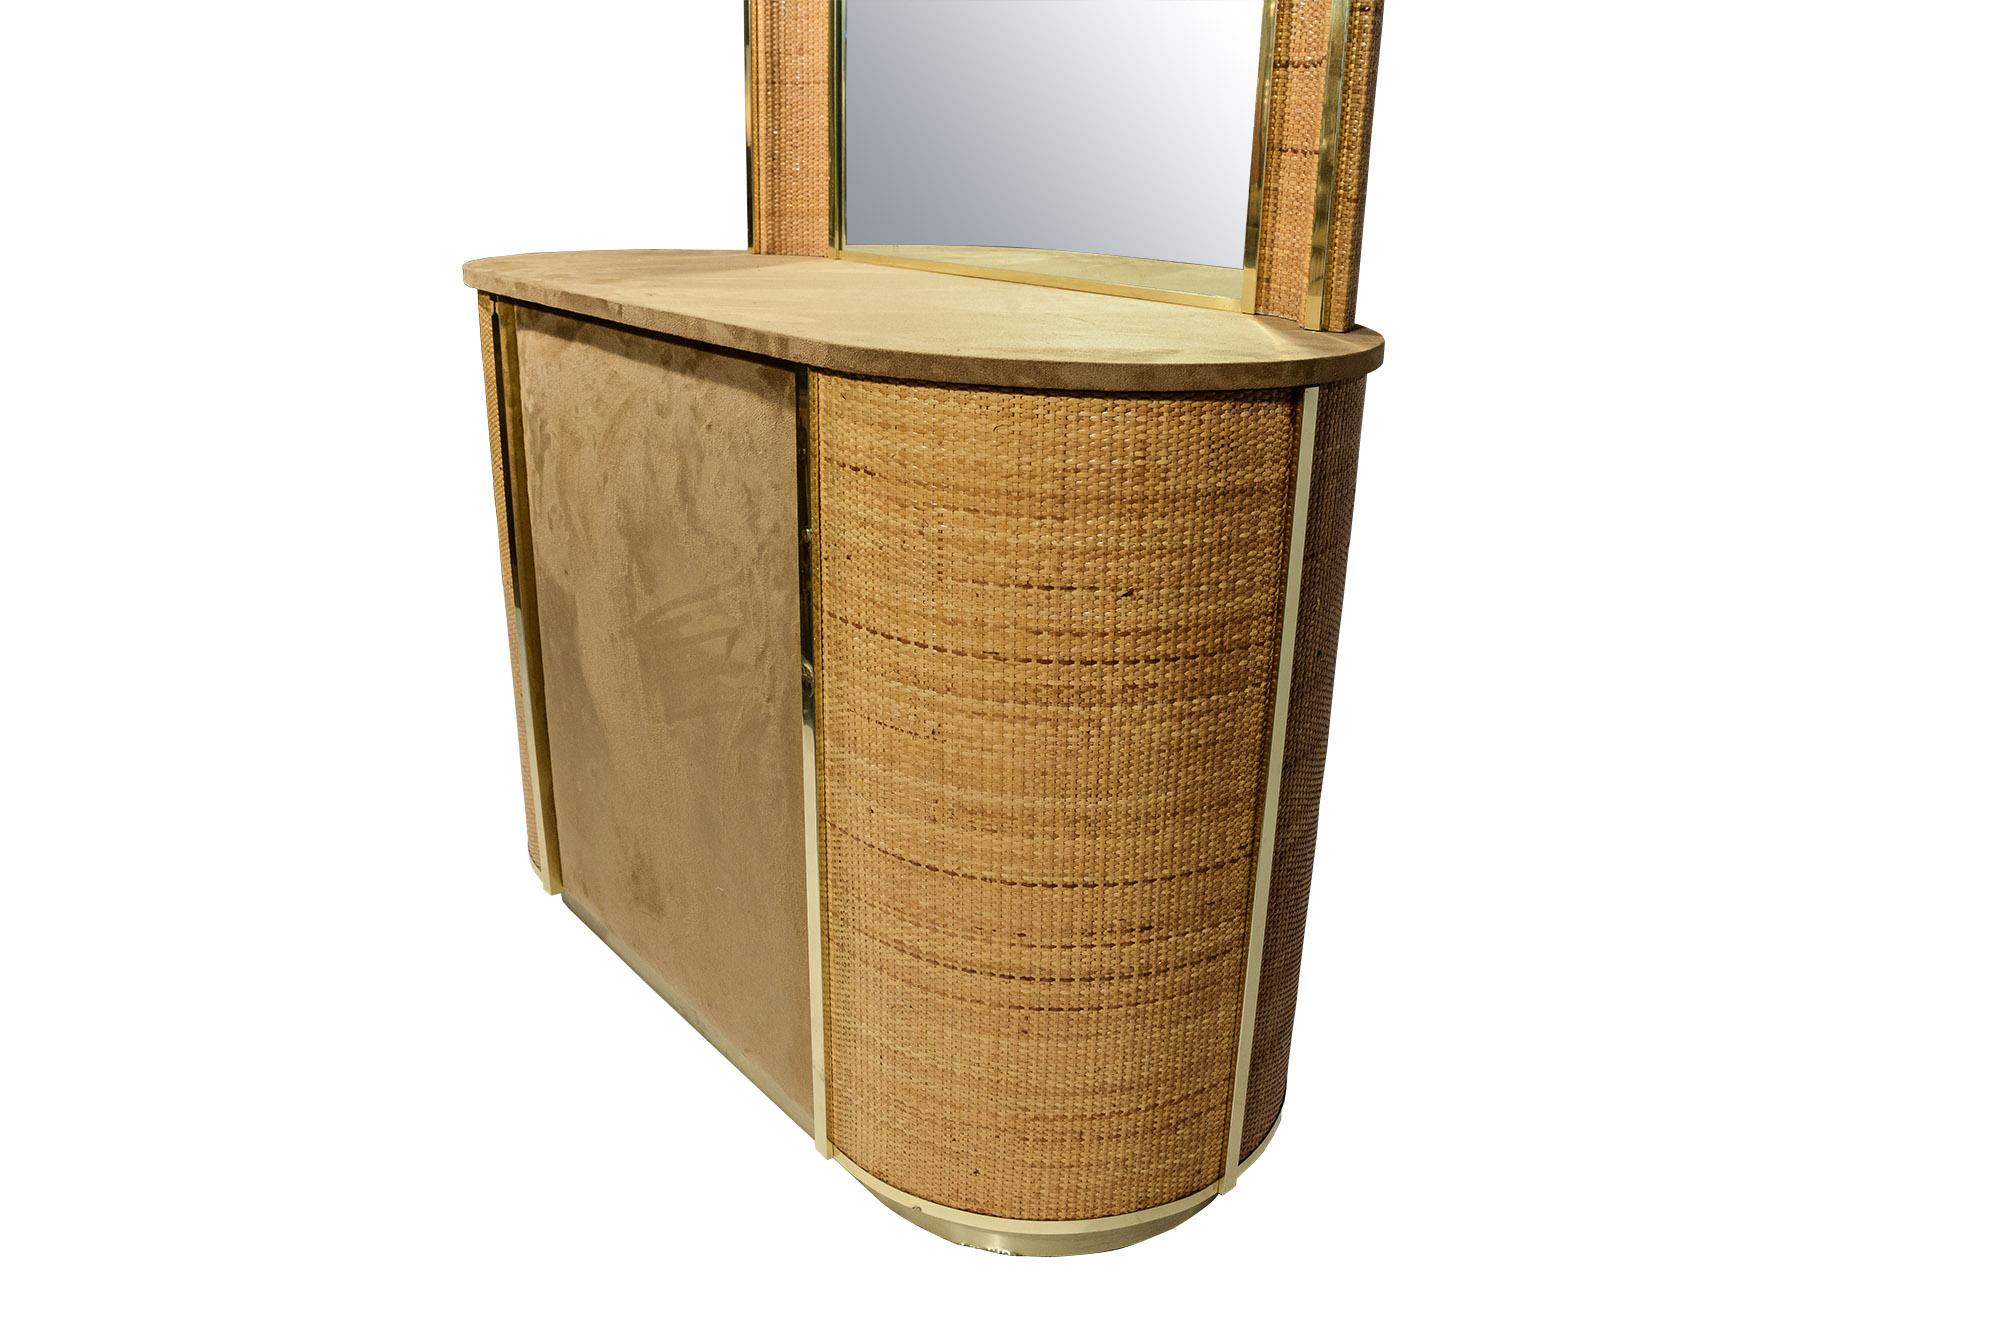 Commode with mirror, 
rattan, original textile and gilt brass,
circa 1970, Italy.
Measures: Cabinet: height 71 cm, width 103 cm, depth 46 cm.
Mirror: height 76 cm, width 85 cm, depth 10 cm.